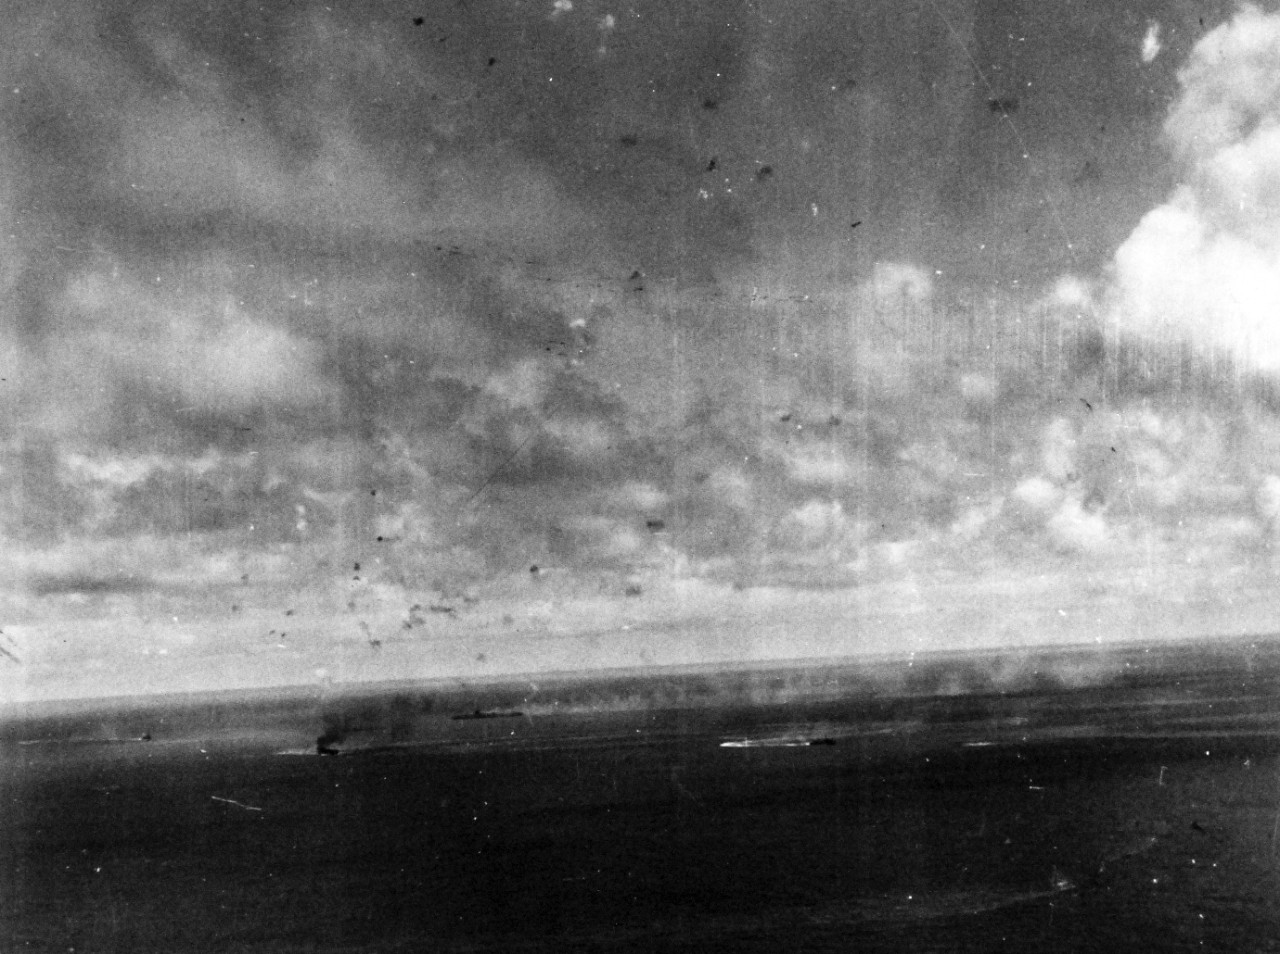 80-G-272556:   Battle of the Sibuyan Sea, October 24, 1944.  Japanese warships under attack by carrier-based planes at Northeast Luzon.  Note the aircraft carrier of the Shokaku class.  Zuikaku is in the background.  The carriers are burning.  Note, the Japanese heavy burst of anti-aircraft fire overhead.  Taken from by a plane from USS Franklin (CV-13), 24 October 1944.    Official U.S. Navy Photograph, now in the collection of the National Archives.   (2014/5/15).